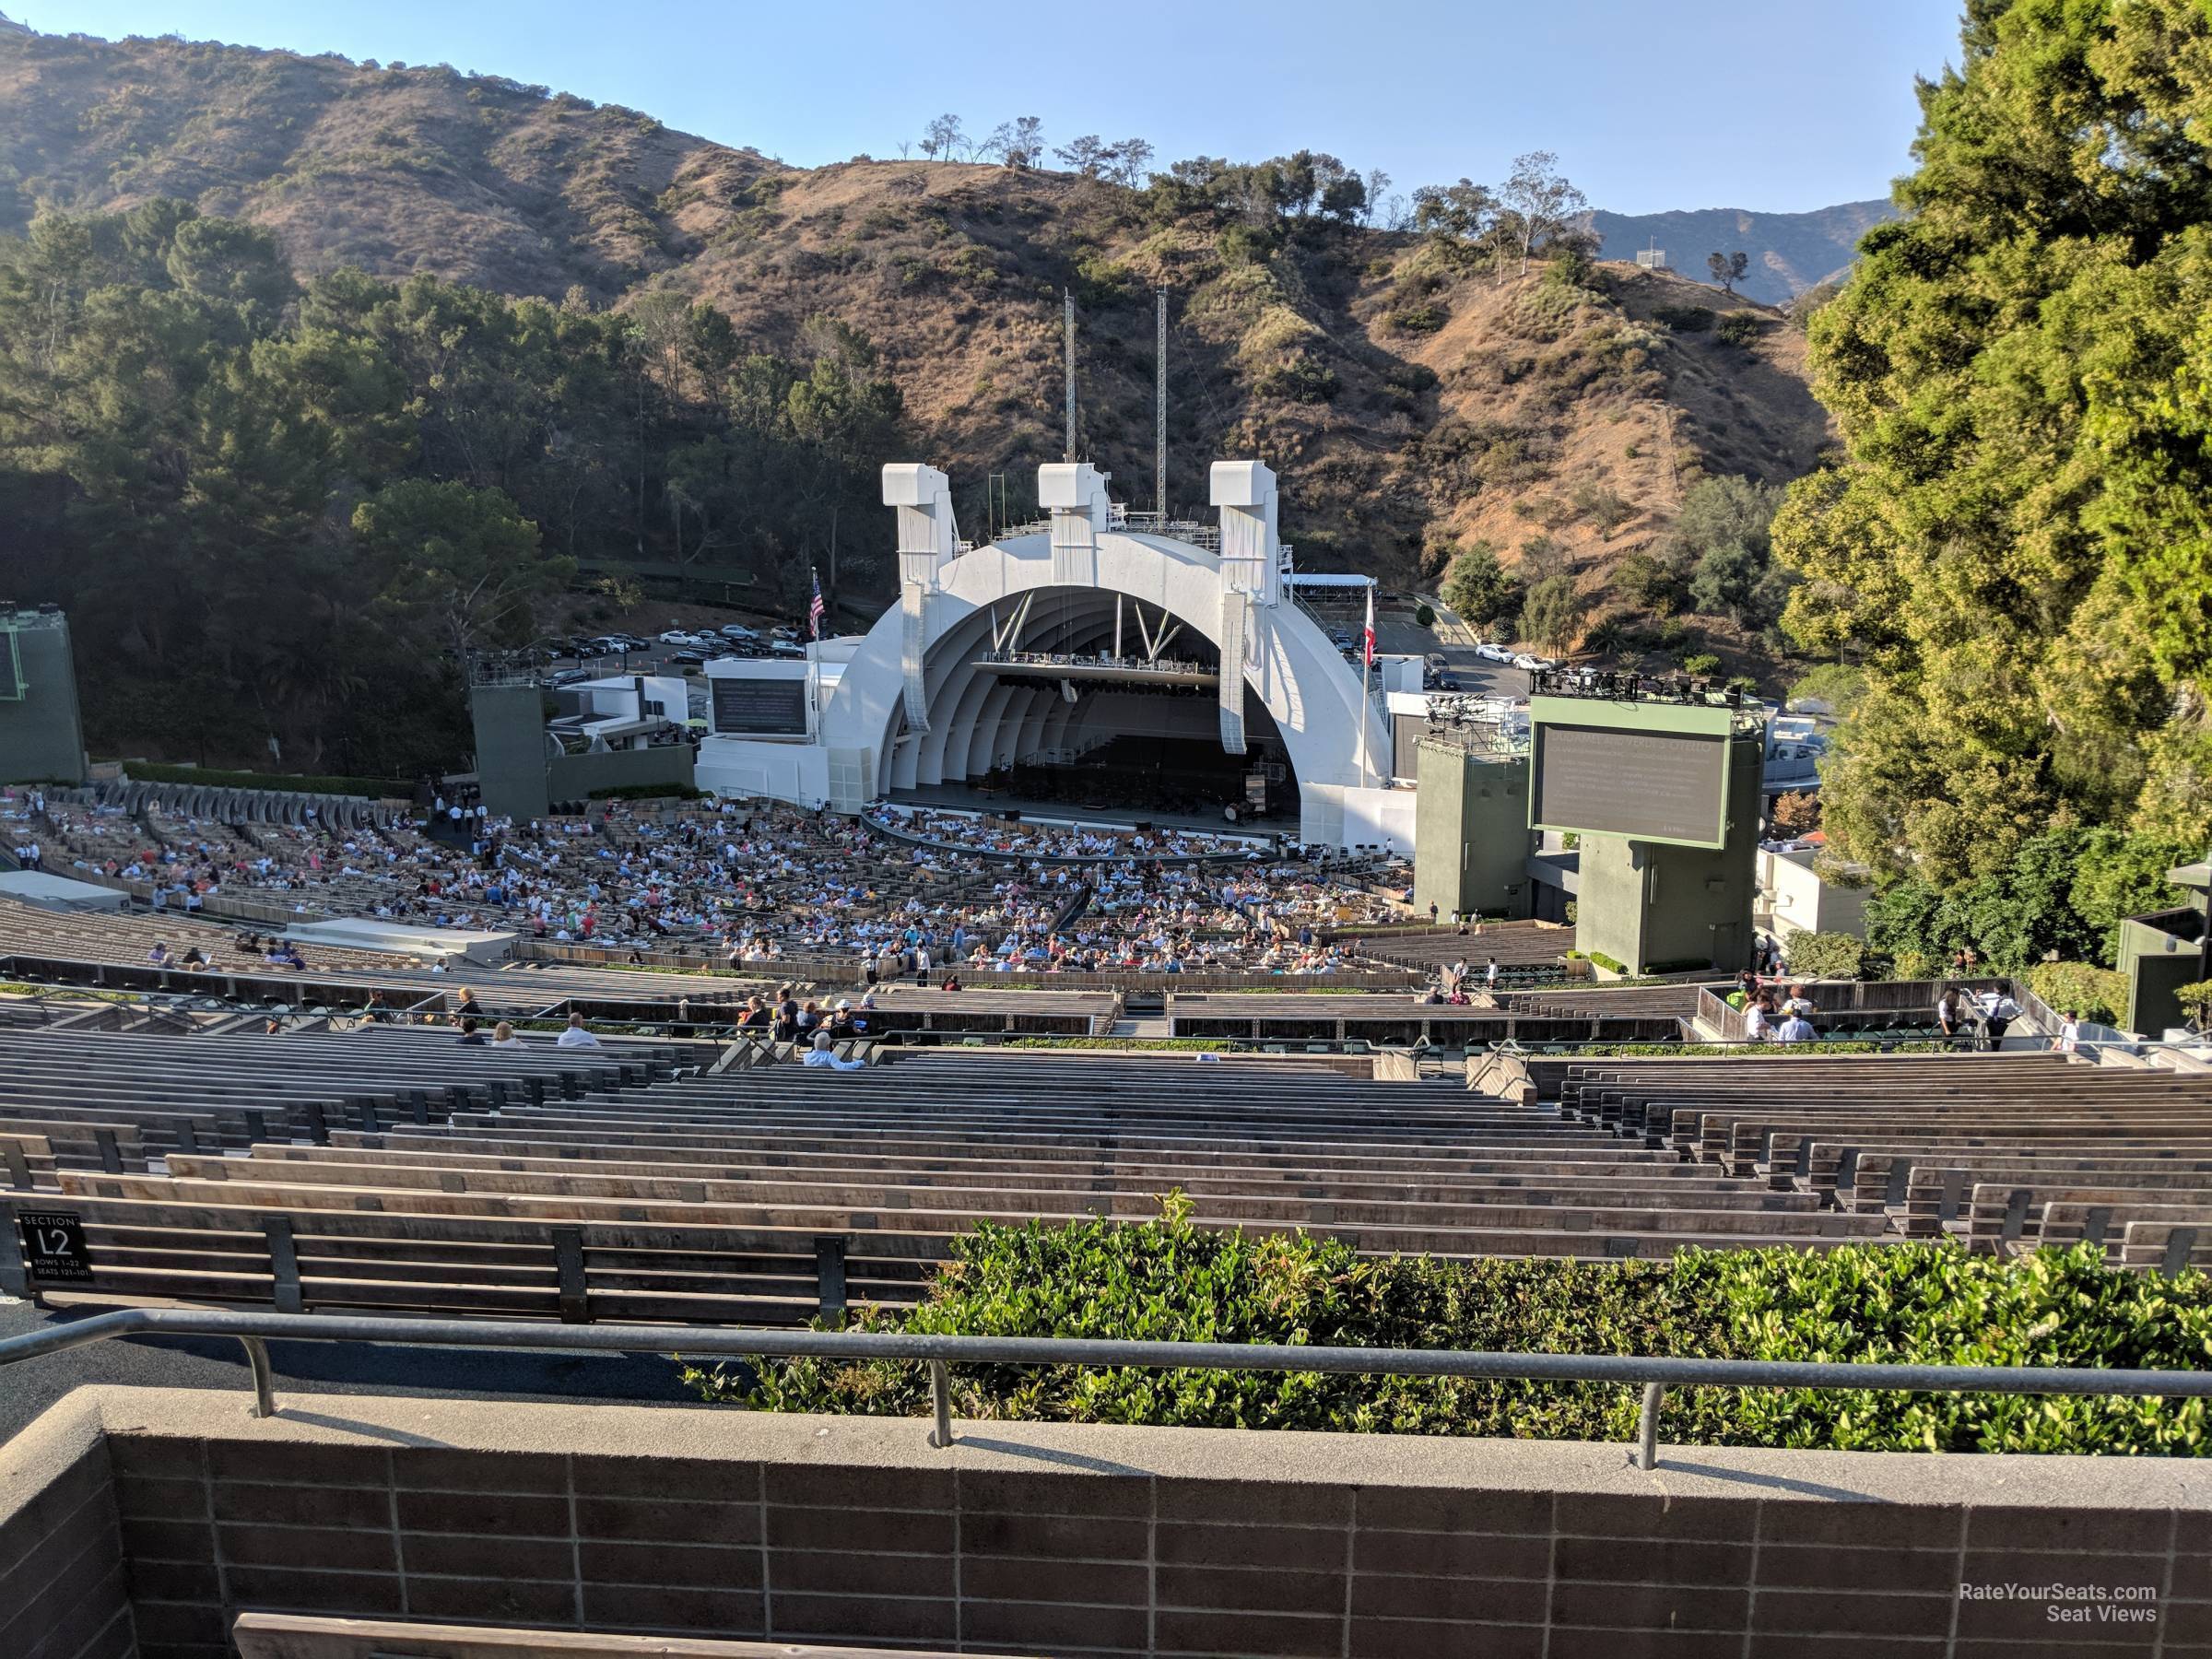 section q3, row 5 seat view  - hollywood bowl